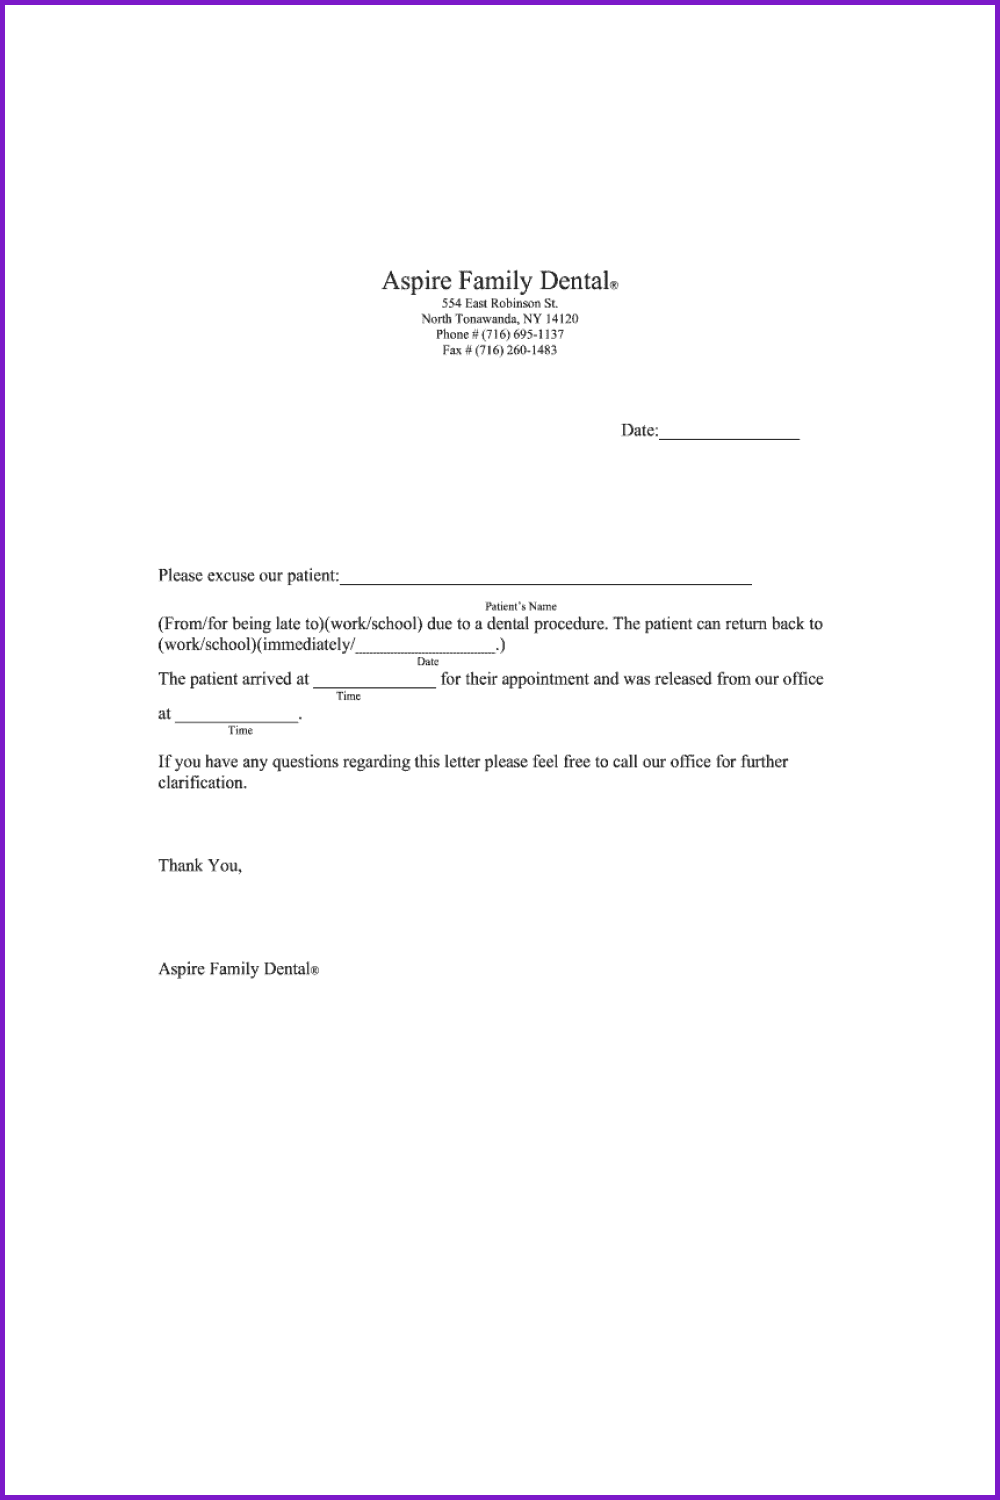 Dentist Note Template.